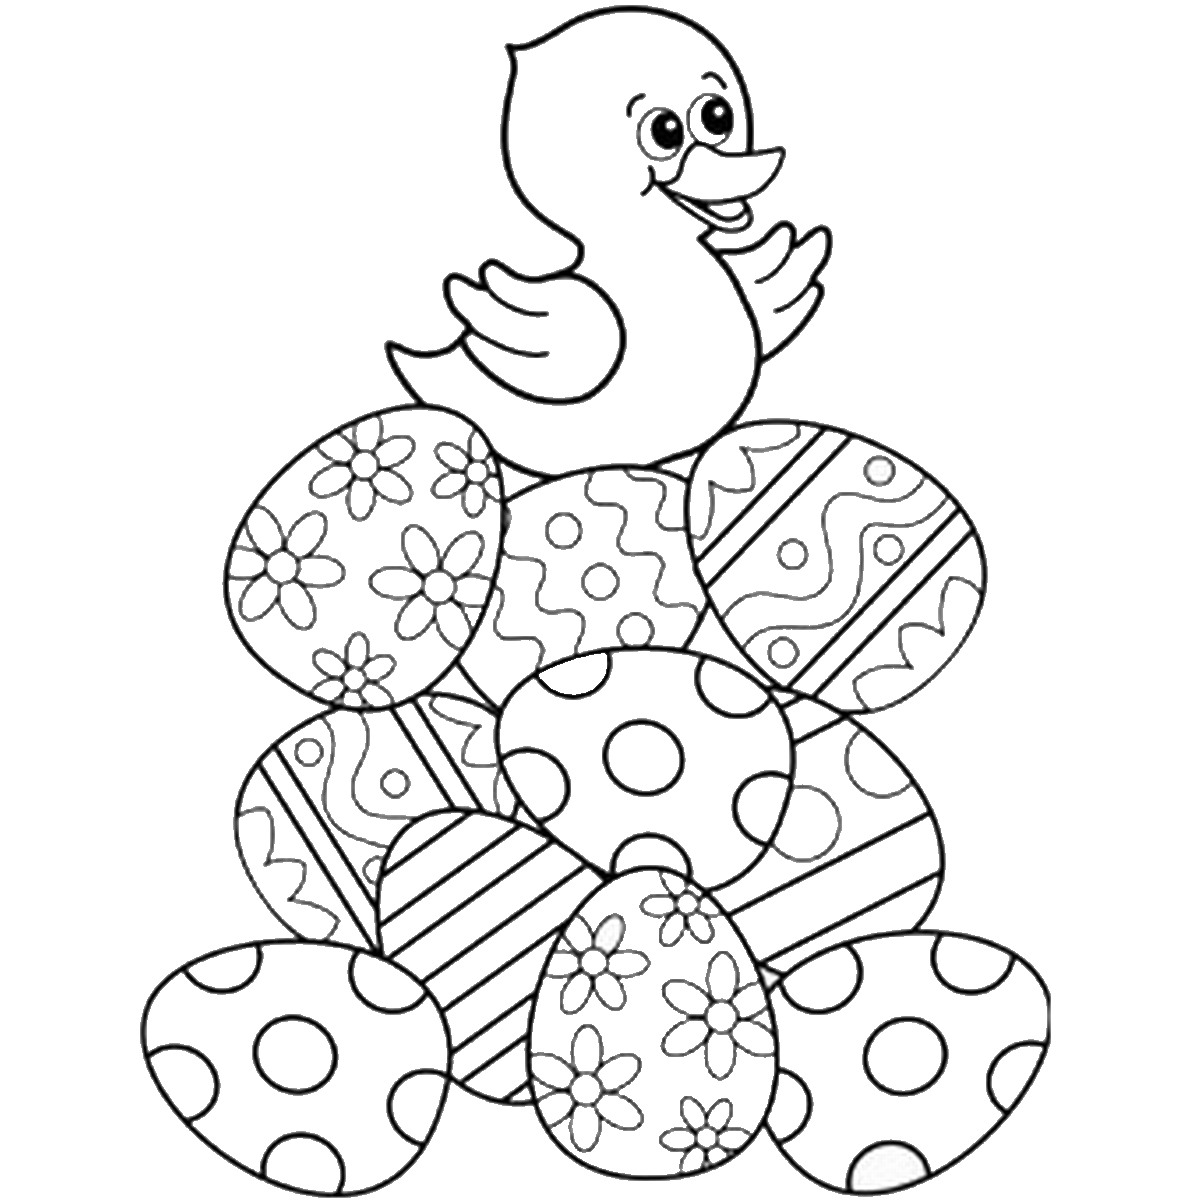 free printable easter coloring pages free printable easter coloring pages easter freebies between the kids printable free pages coloring easter 